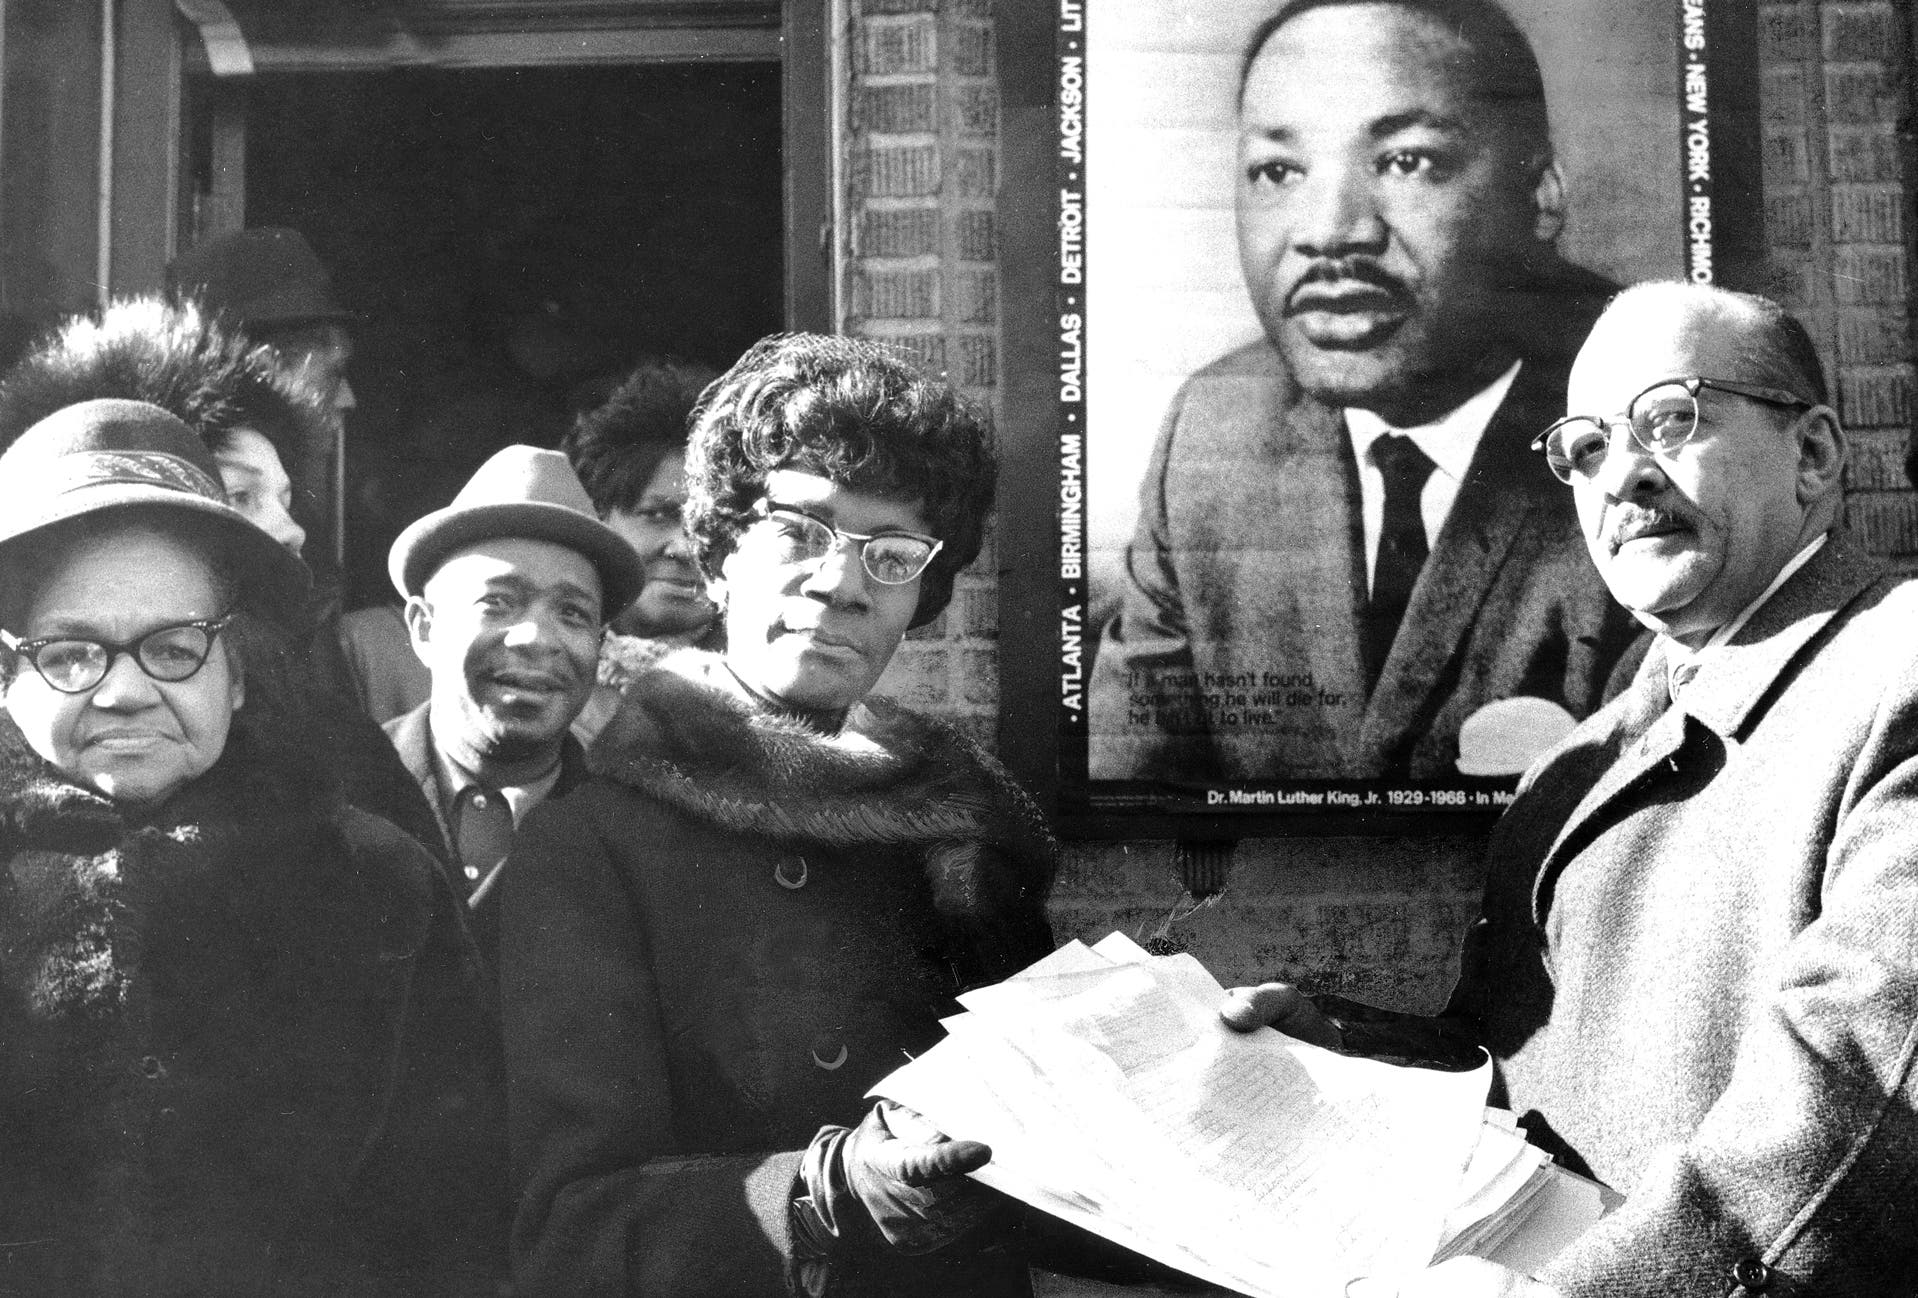 Rep. Shirley Chisholm receives petitions asking Congress to designate January 15, a national holiday in honor of Martin Luther King, Jr.